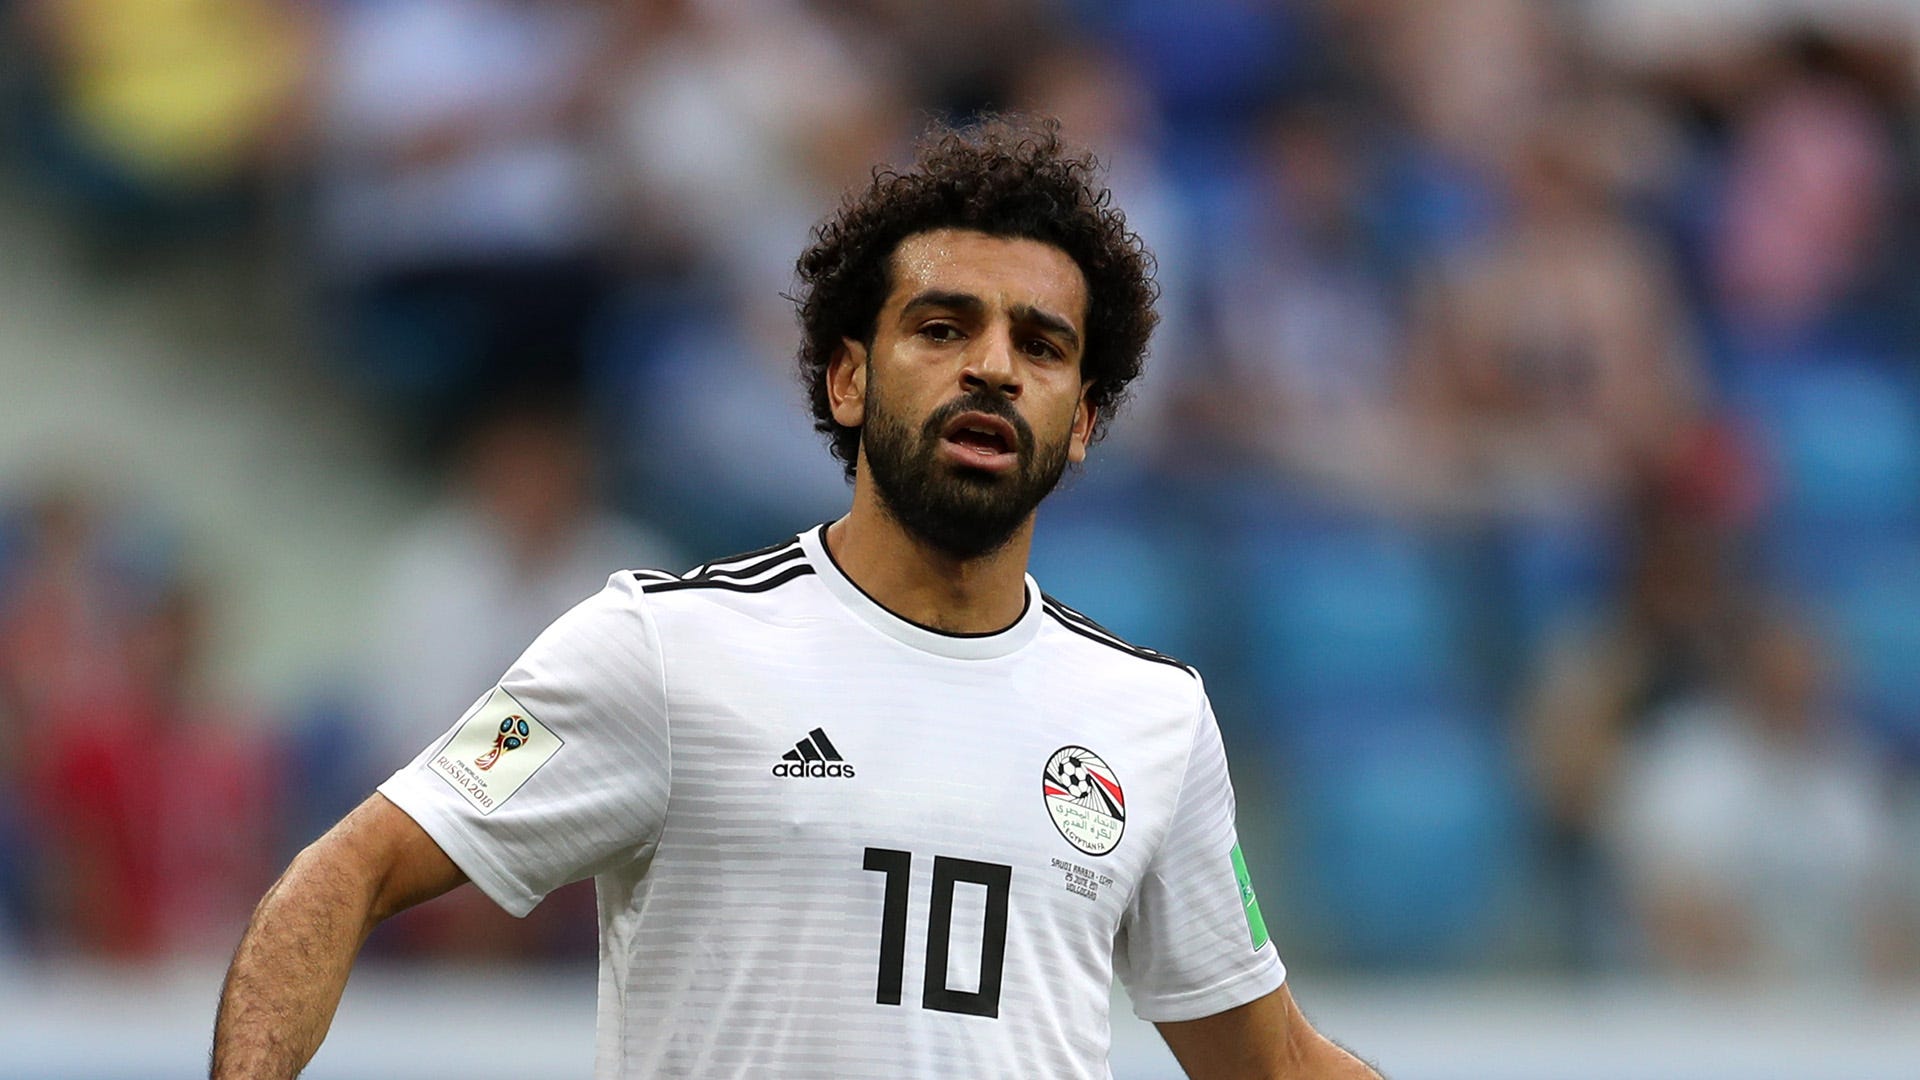 Behind Mohamed Salah's row with the Egypt national team Malaysia